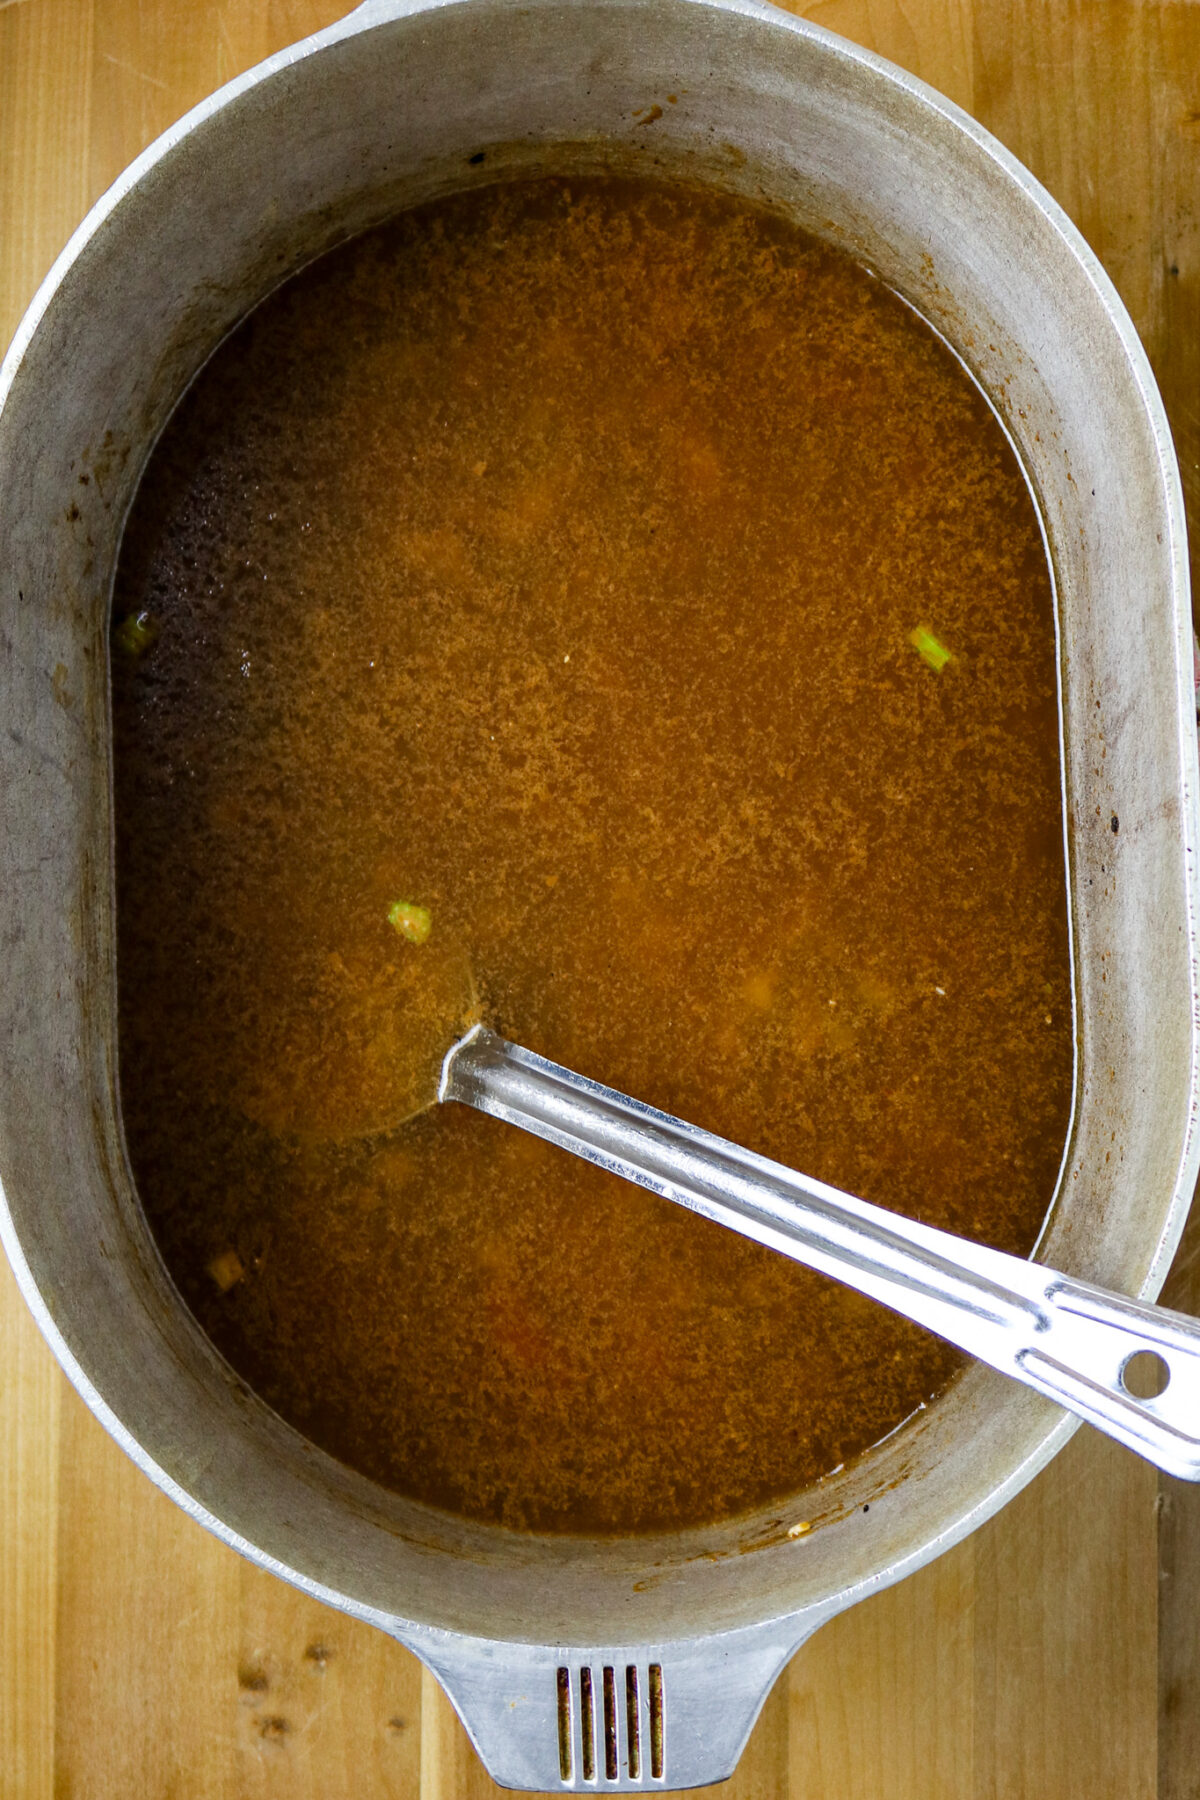 A large pot of gumbo with just roux and broth in it.